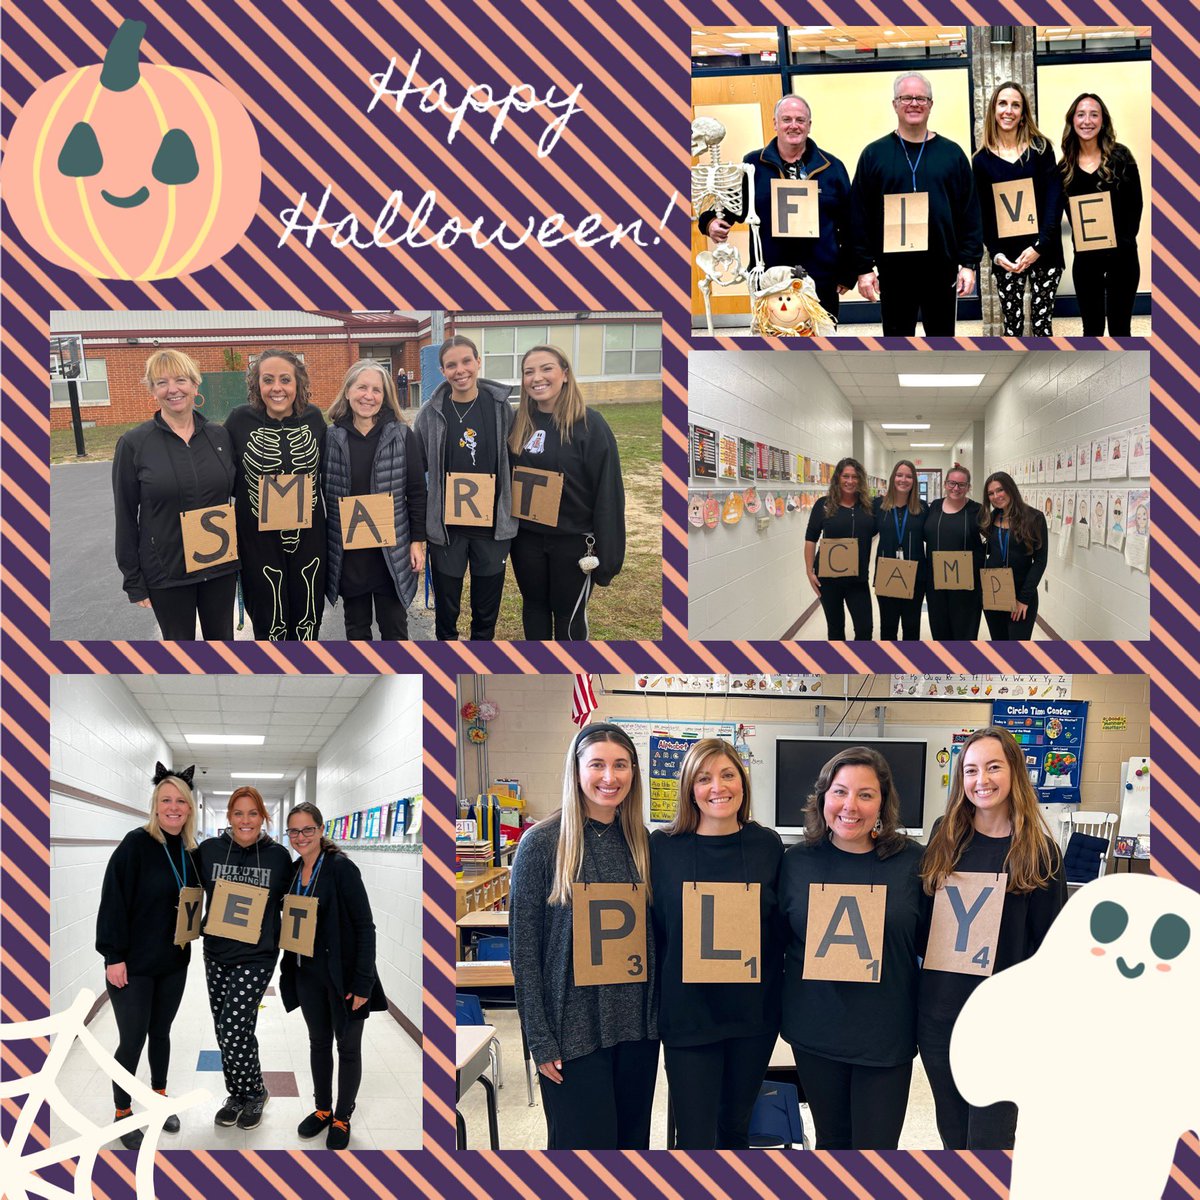 Happy Halloween from the Tabernacle Education Association! #TabernacleEA